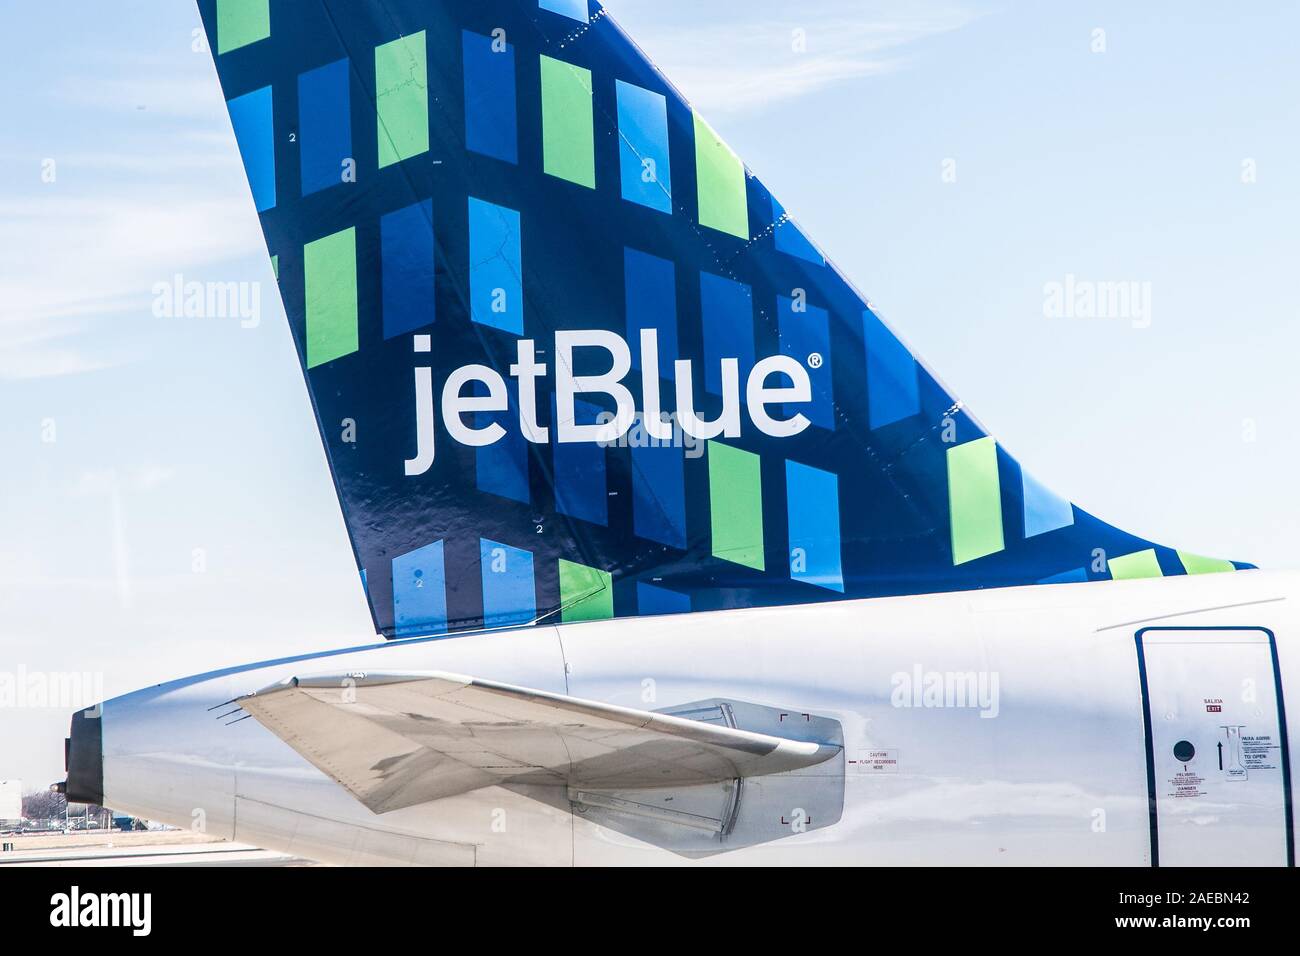 New York, 11/26/2019: Closeup view of a JetBlue jet's tail at JFK airport. Stock Photo